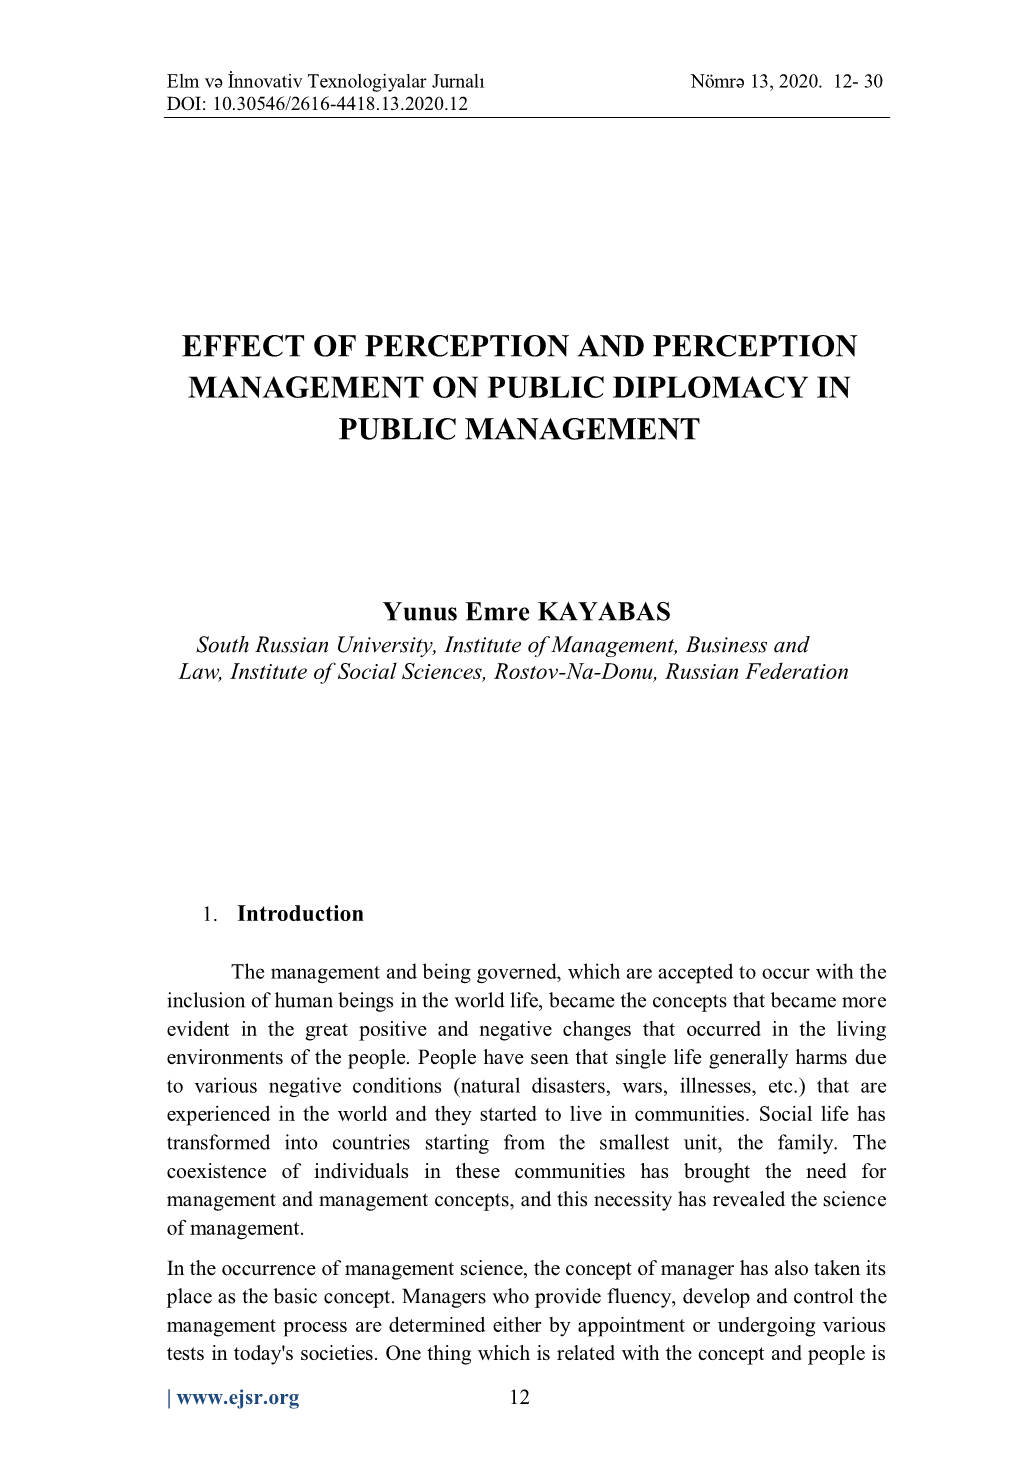 Effect of Perception and Perception Management on Public Diplomacy in Public Management